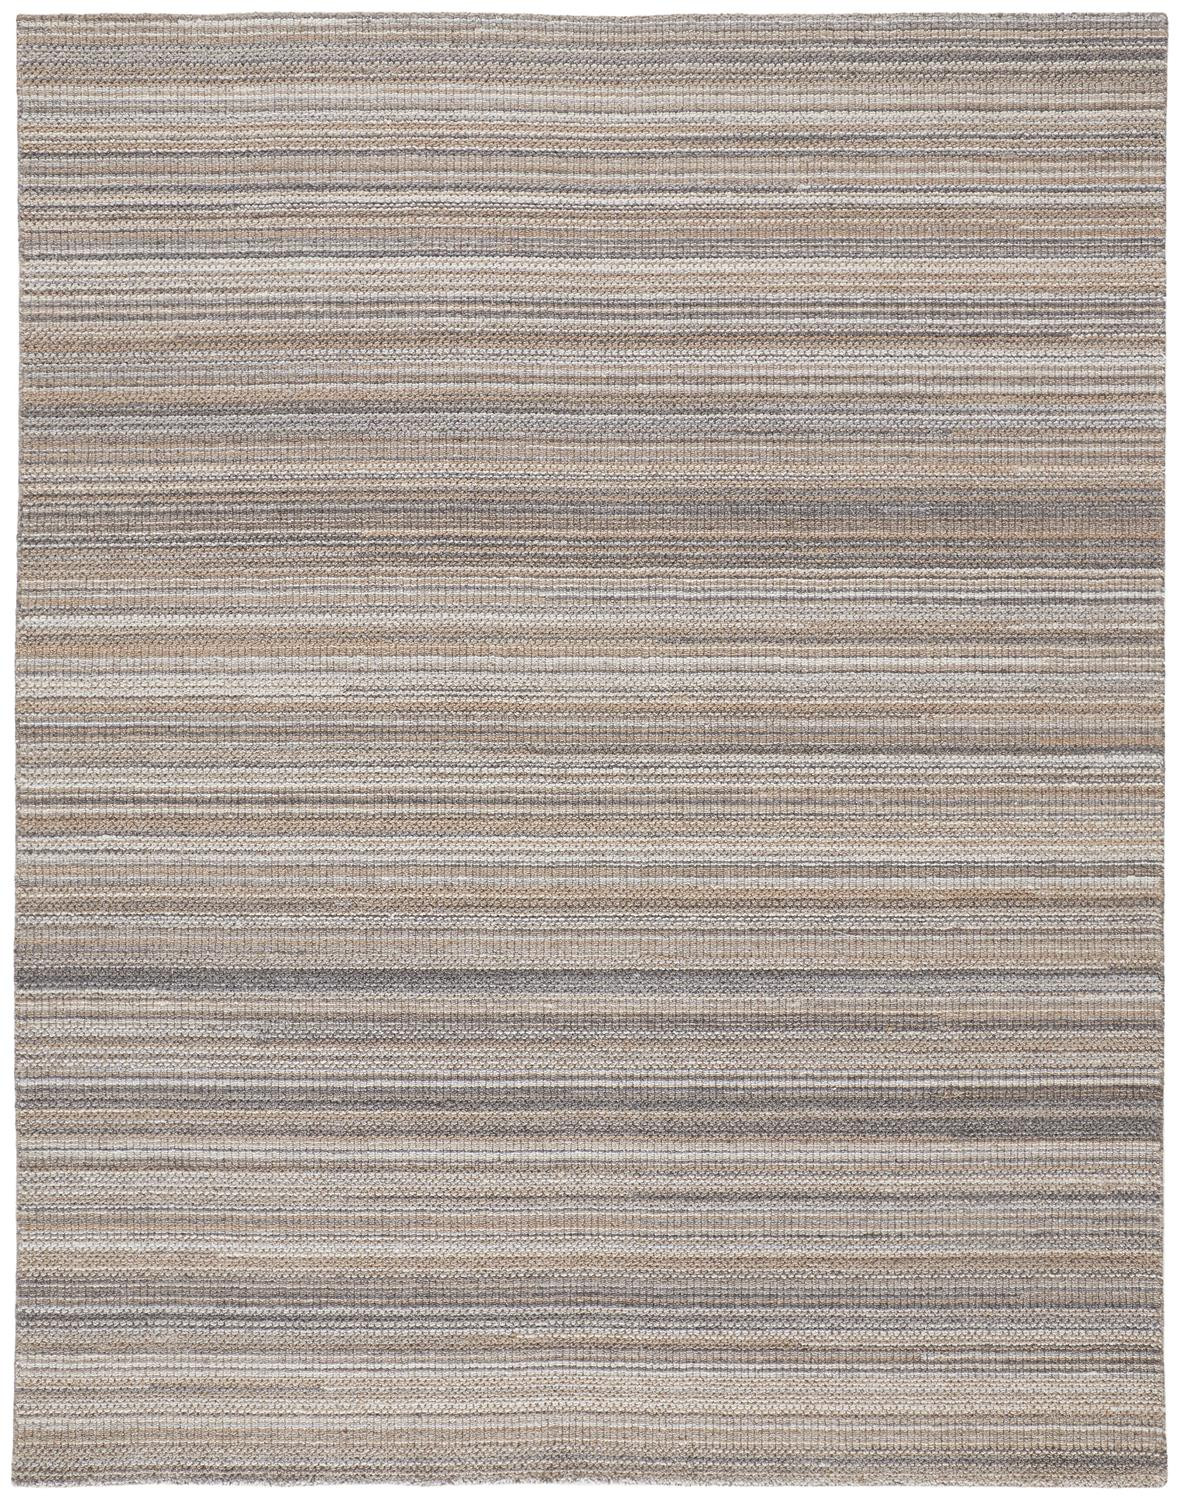 5' X 8' Brown And Taupe Wool Hand Woven Stain Resistant Area Rug-514051-1